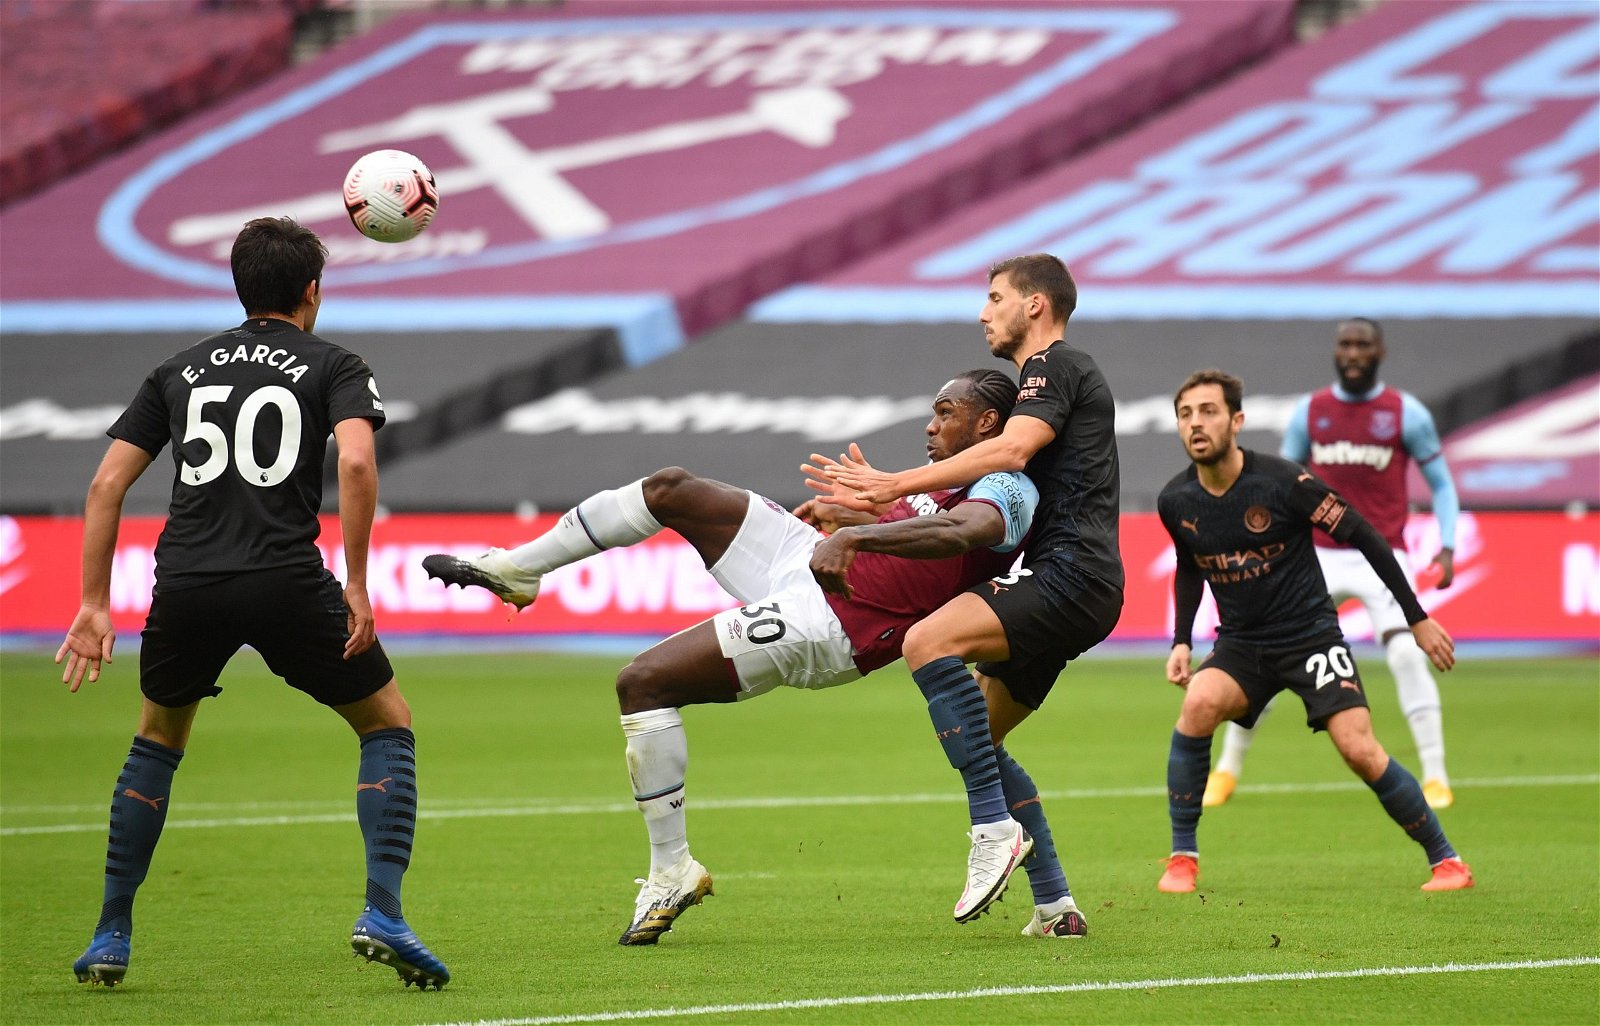 Manchester City vs West Ham Head Head Results (H2H)